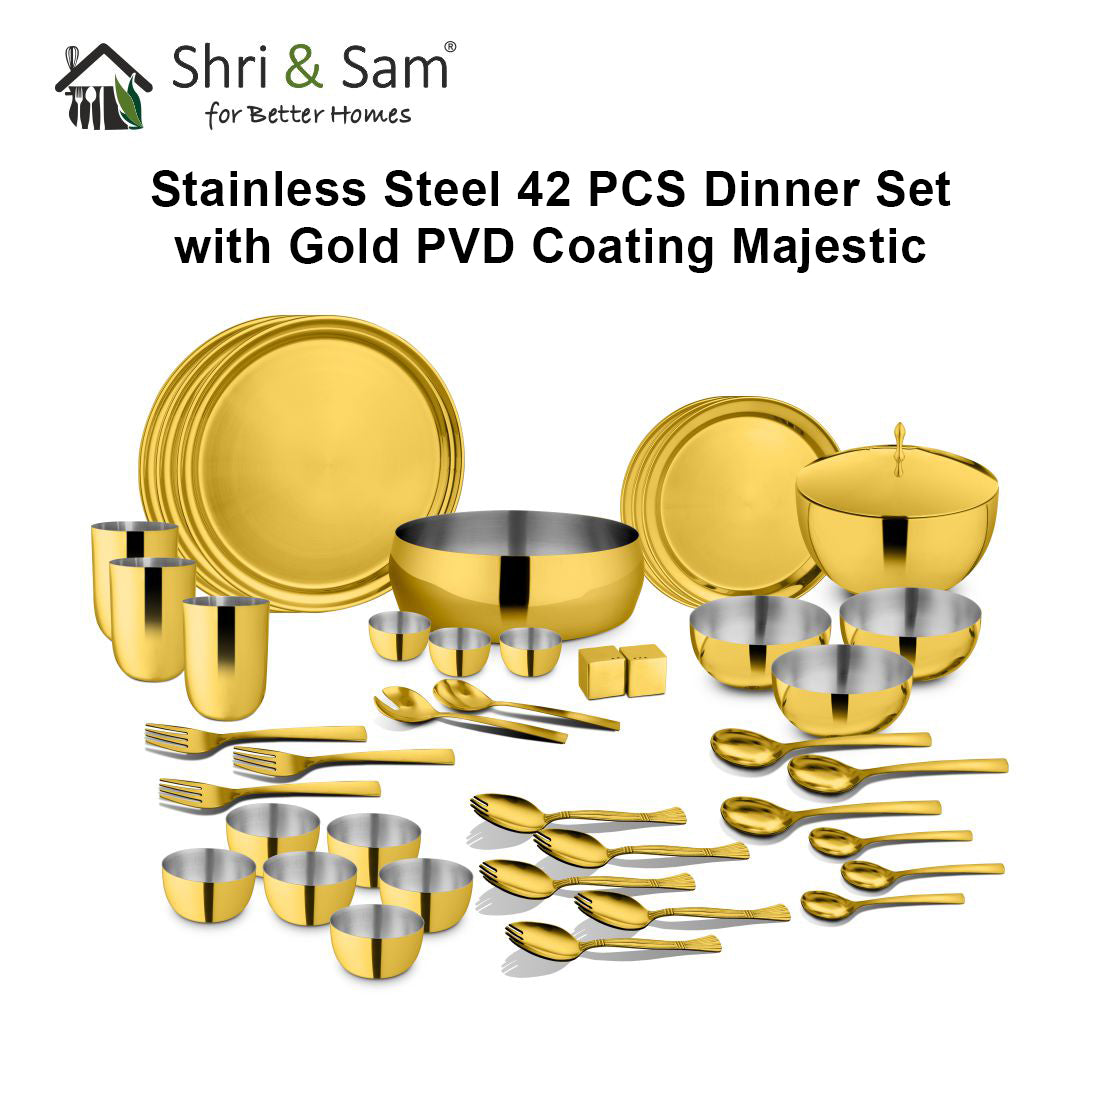 Stainless Steel 42 PCS Dinner Set (3 People) with Gold PVD Coating Majestic